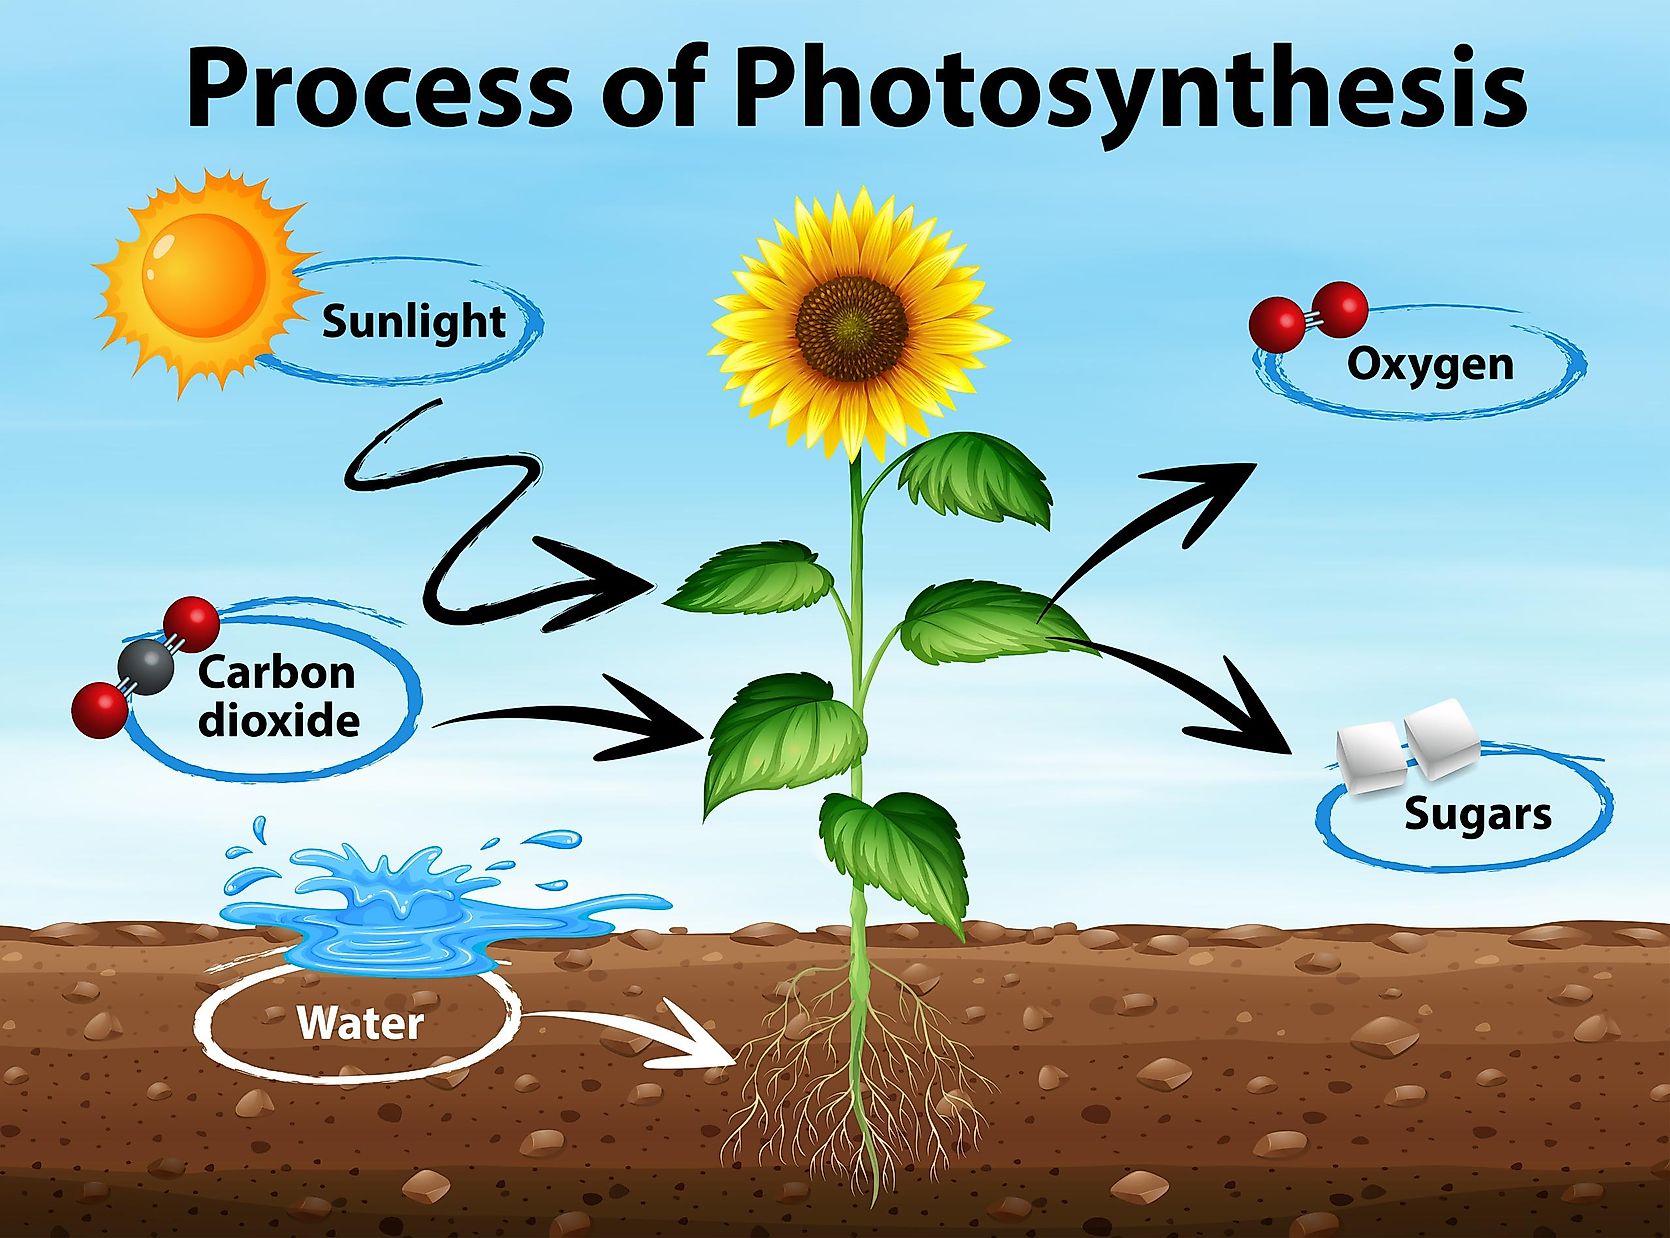 what is the common meaning of photosynthesis